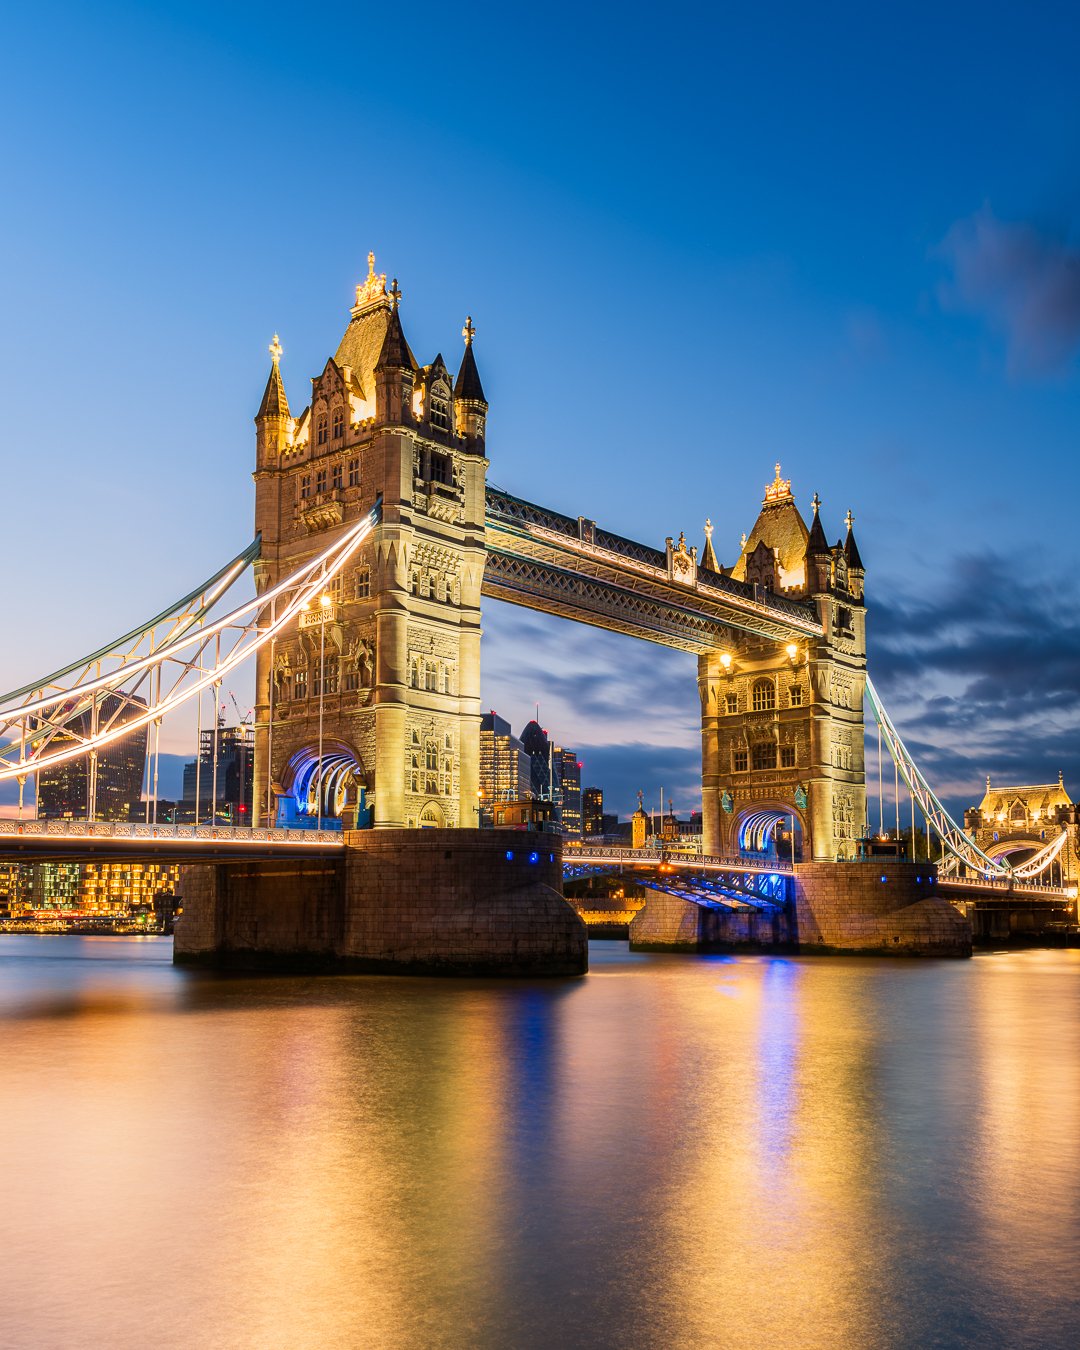 &quot;Tower Bridge is a Grade I listed combined bascule and suspension bridge in London, built between 1886 and 1894, designed by Horace Jones and engineered by John Wolfe Barry with the help of Henry Marc Brunel. It crosses the River Thames close to